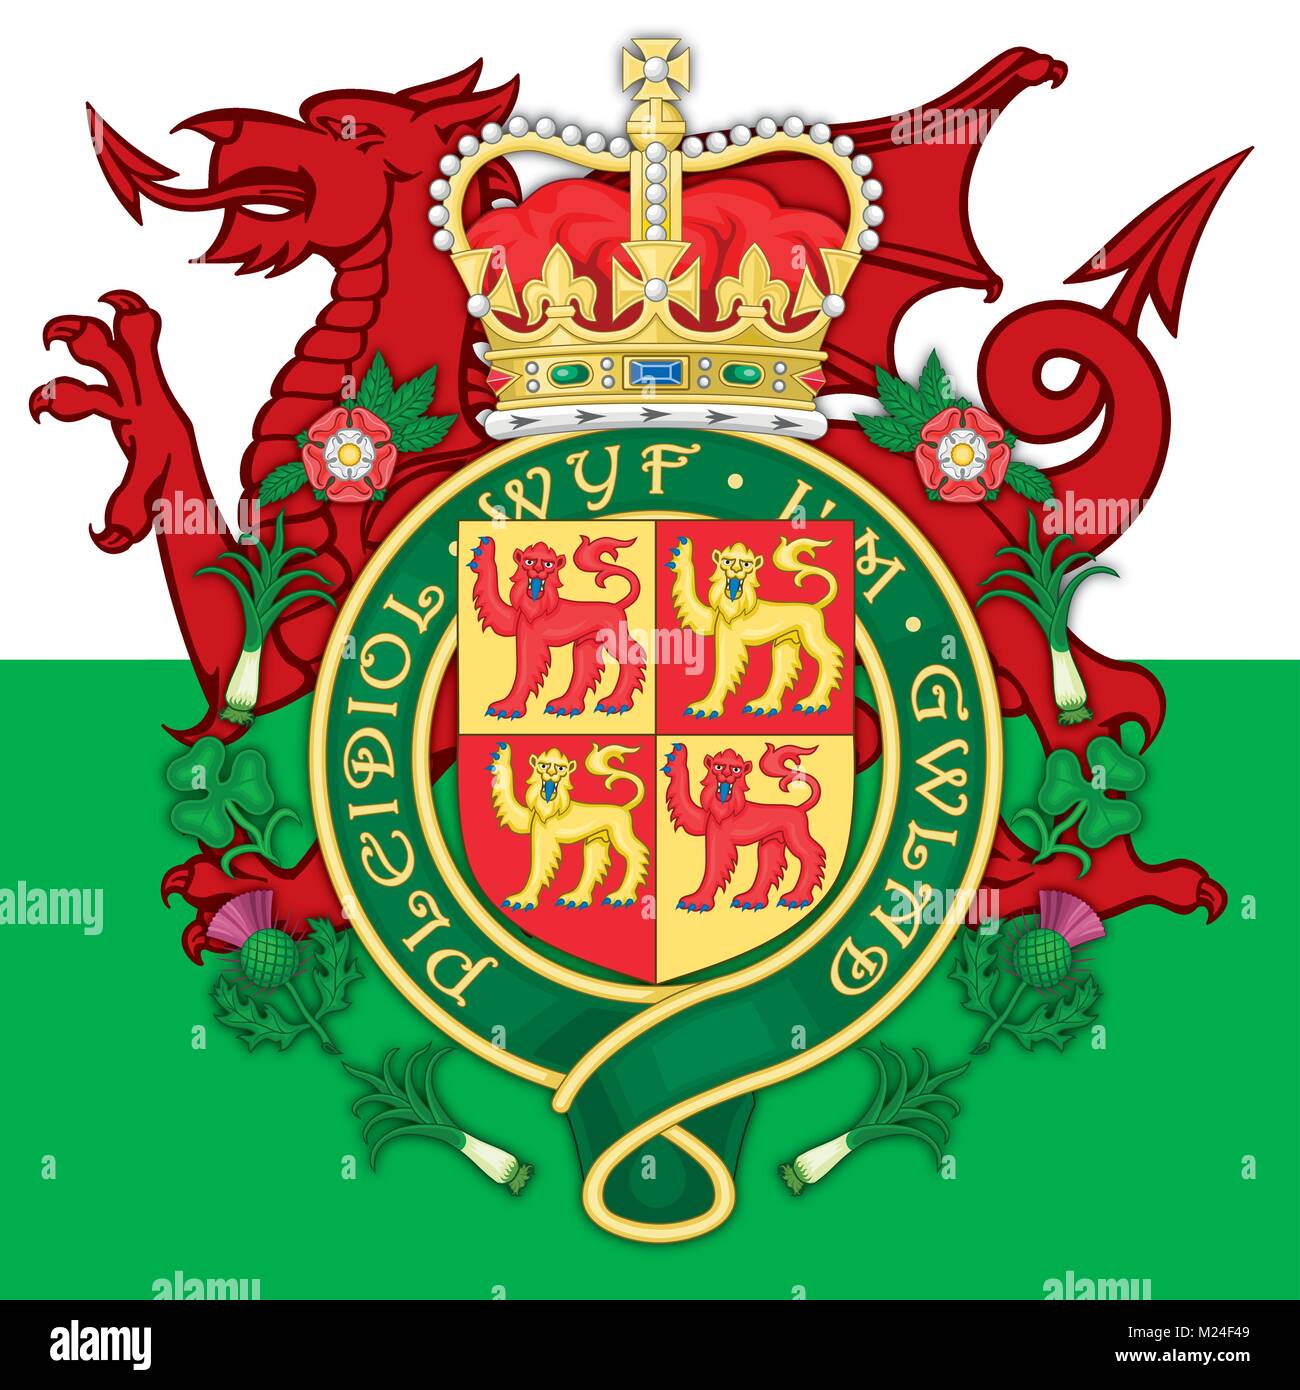 Wales coat of arms and official symbols of the nation Vector Image & Art - Alamy